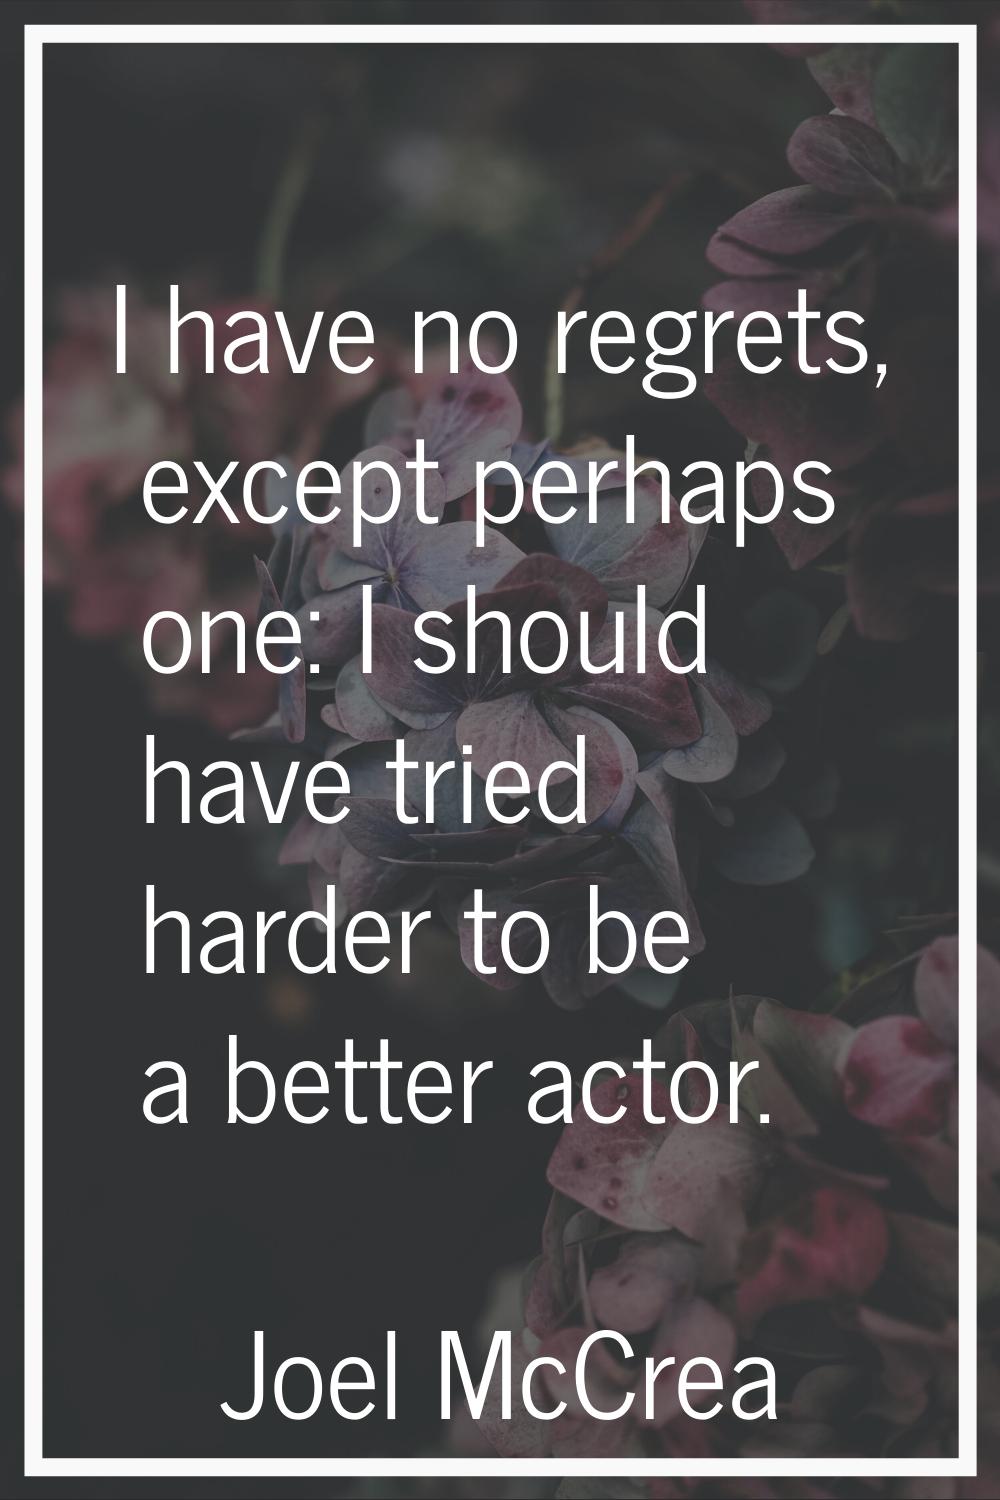 I have no regrets, except perhaps one: I should have tried harder to be a better actor.